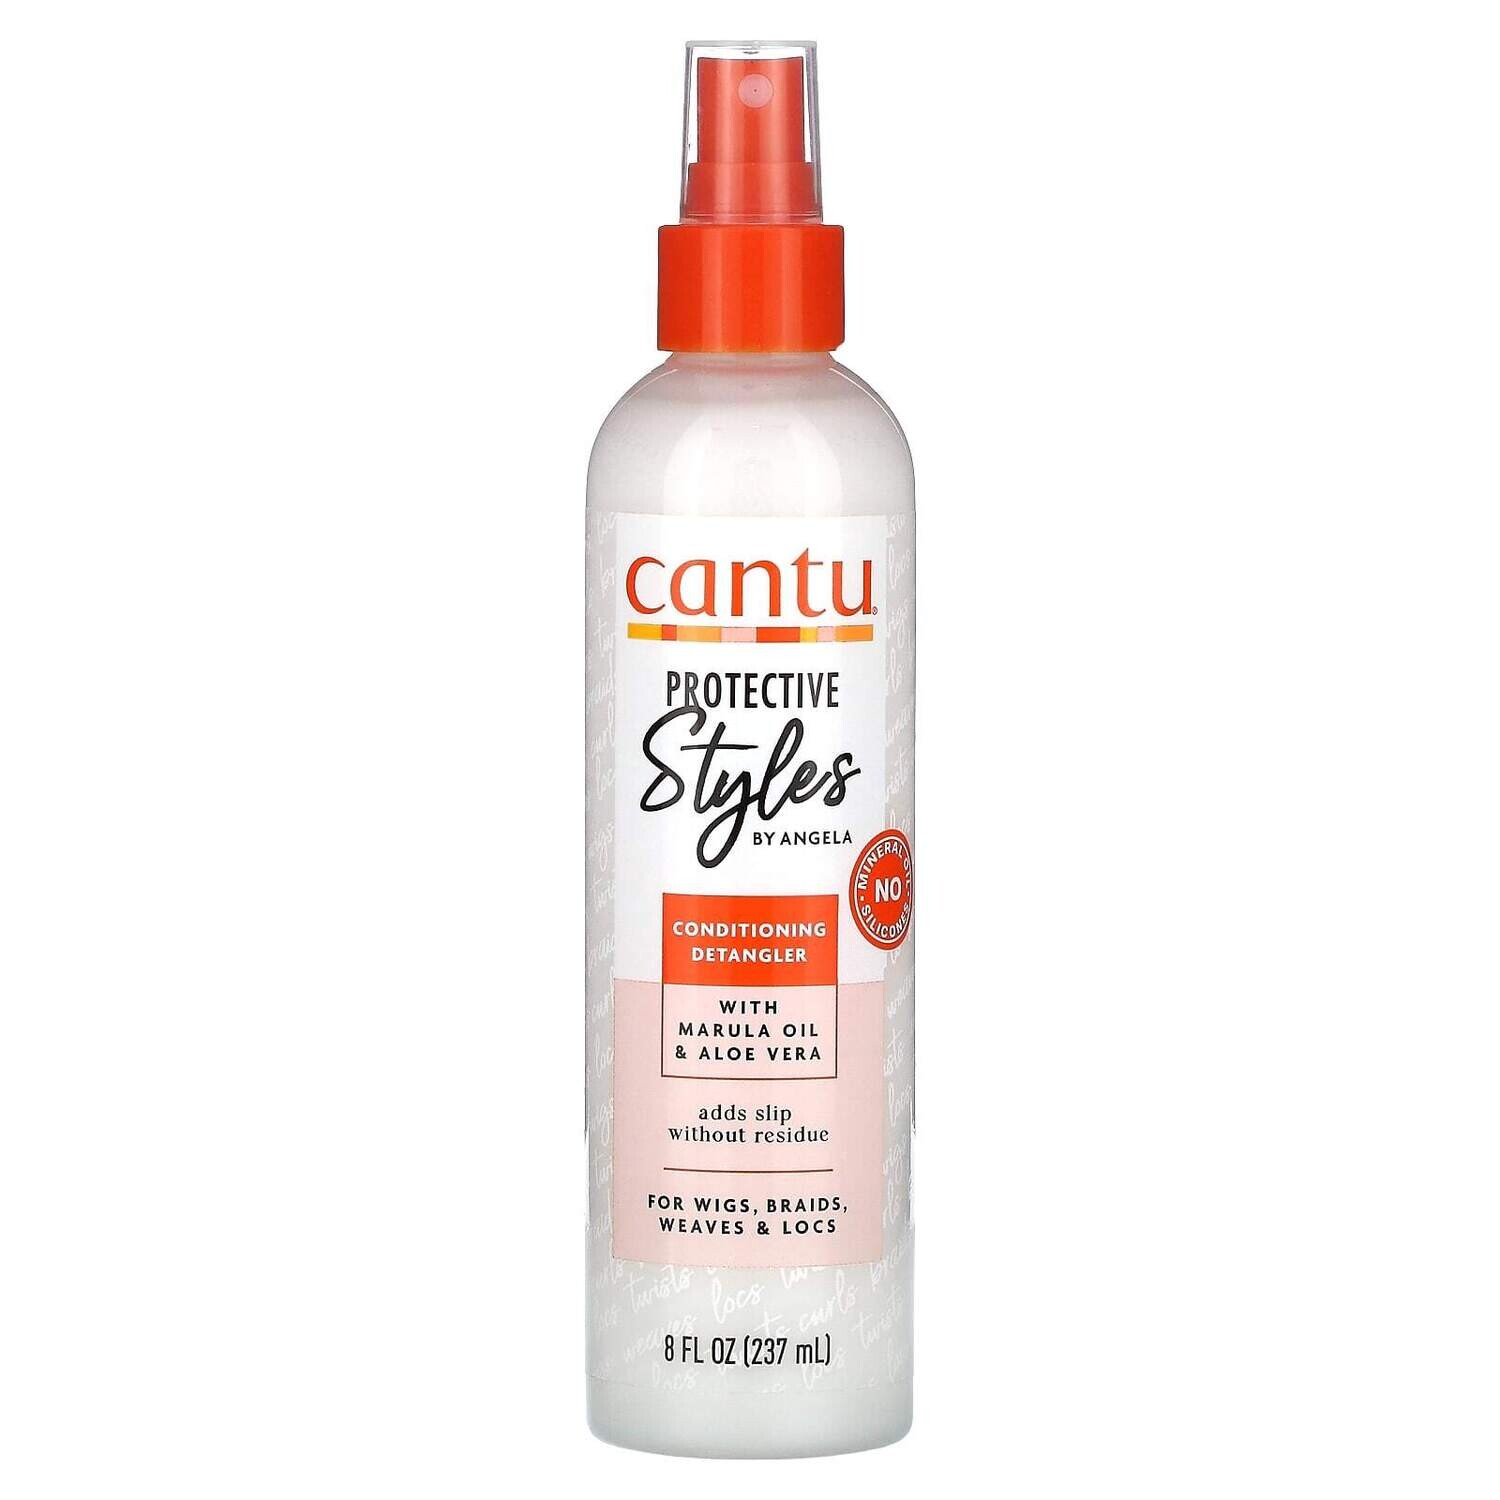 Cantu Protective Styles by Angela Conditioning Detangler 8oz